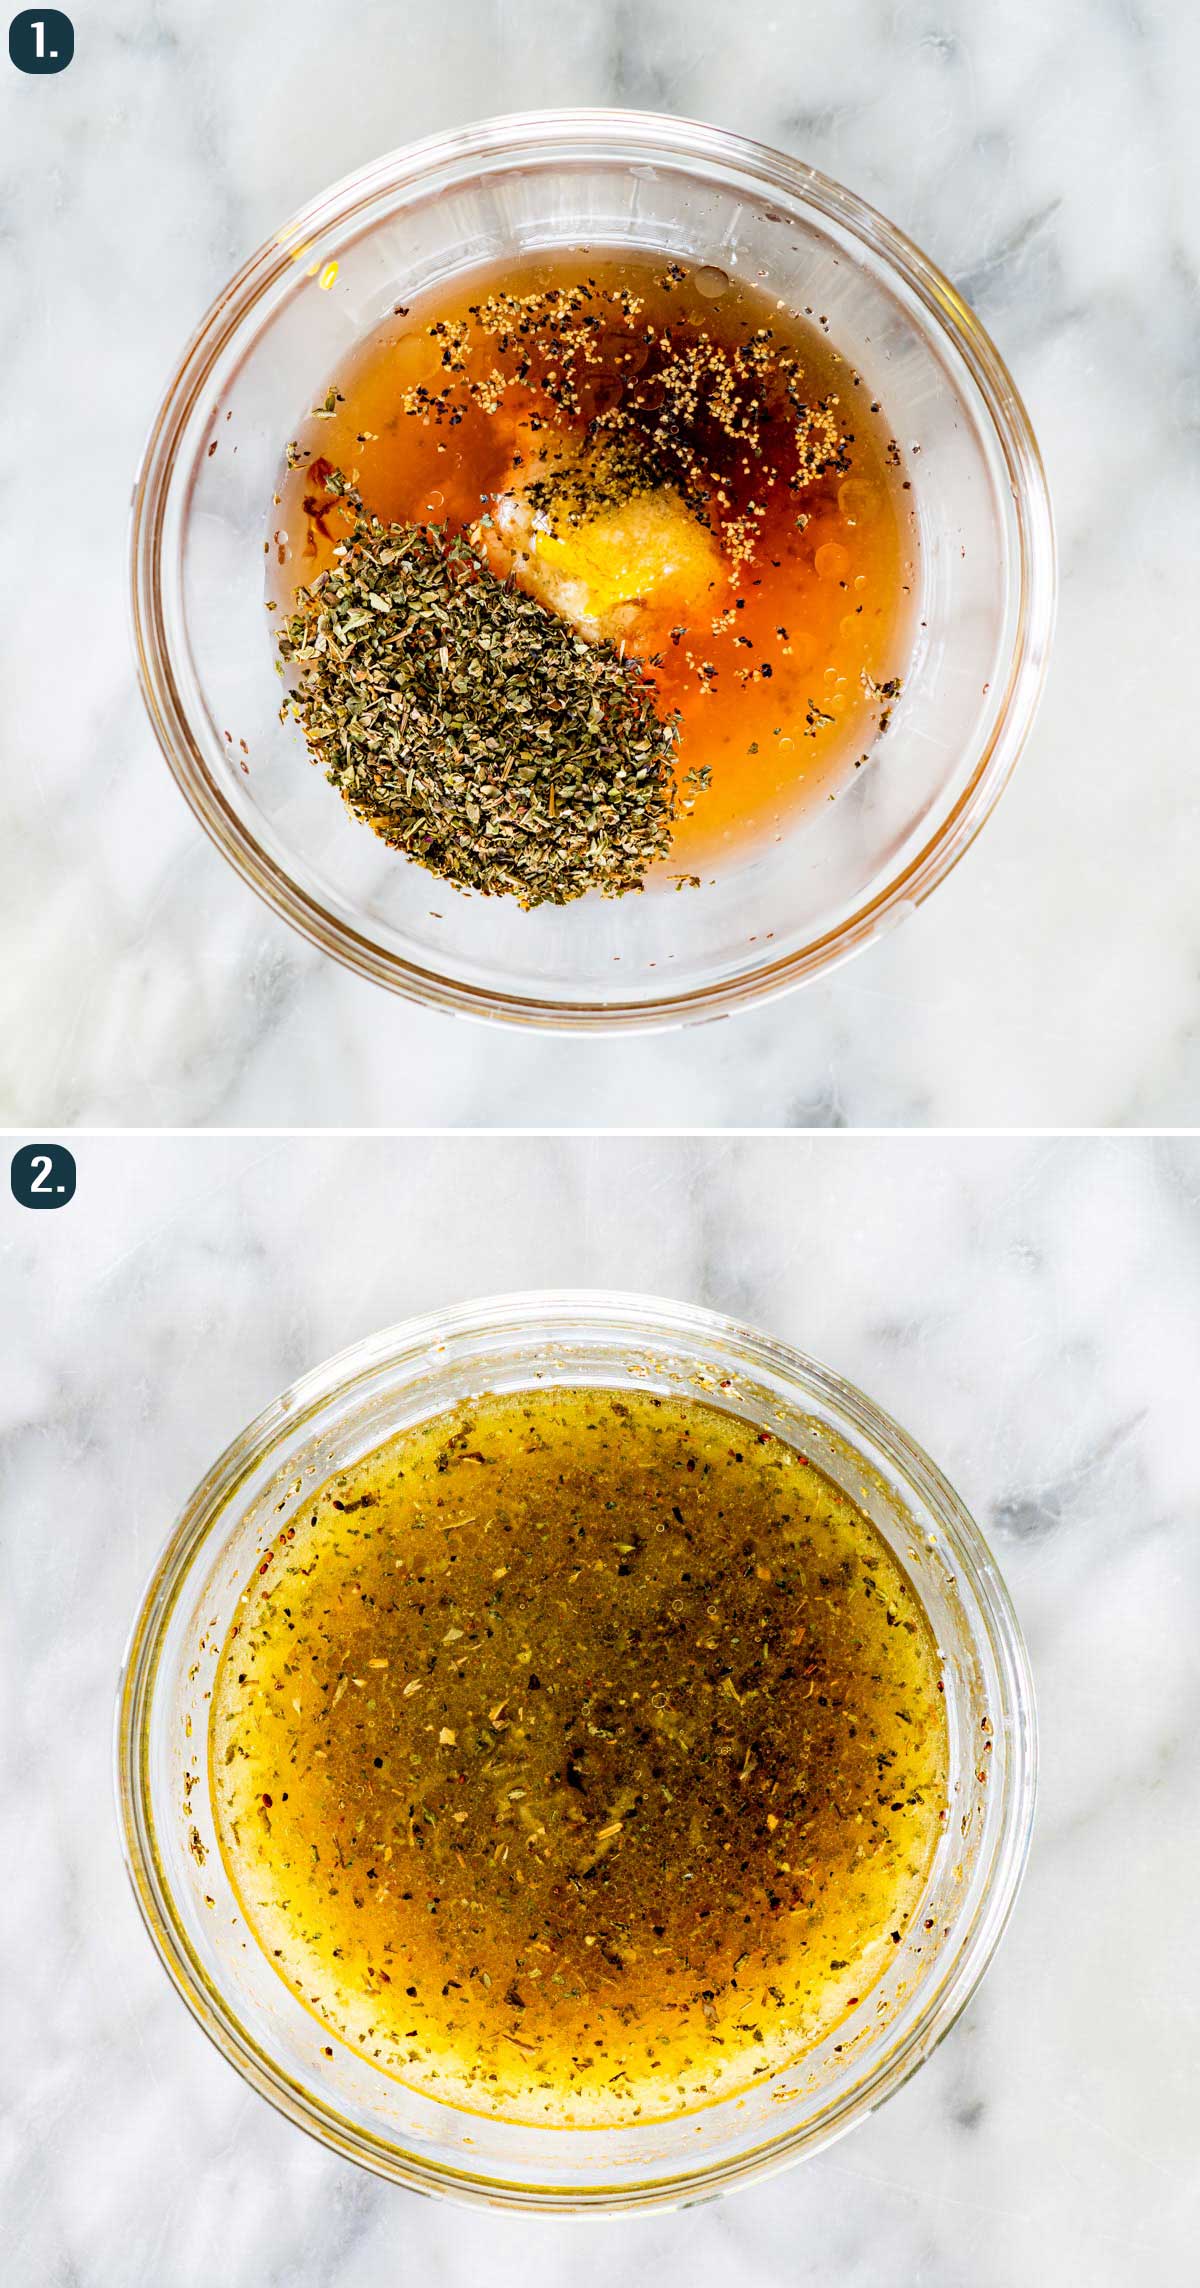 detailed process shots showing how to make greek salad dressing